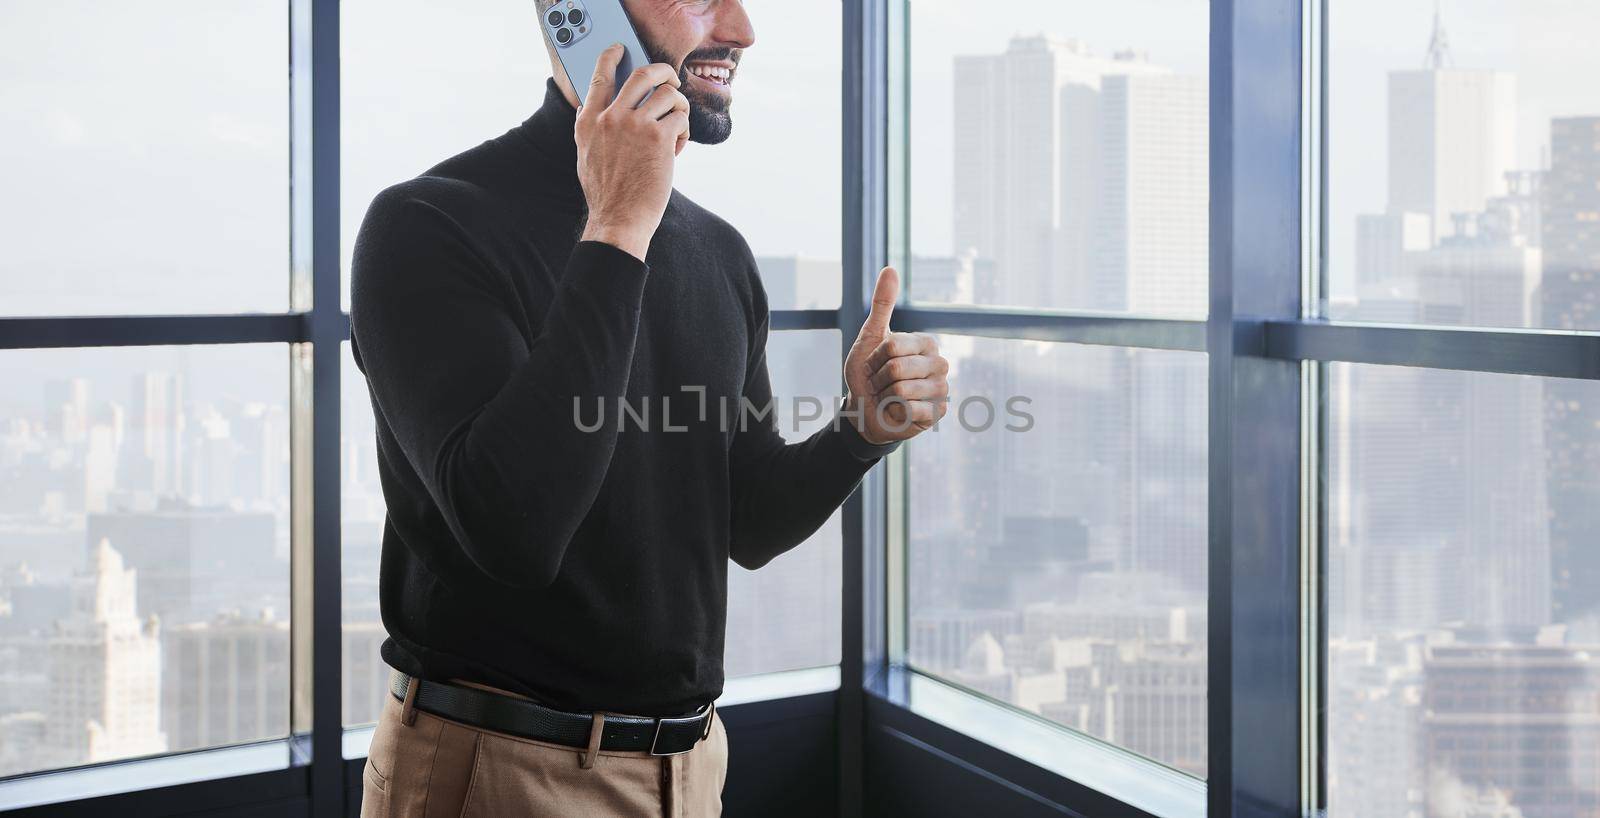 businessman gives a thumbs up. A person uses mobile technologies by SmartPhotoLab